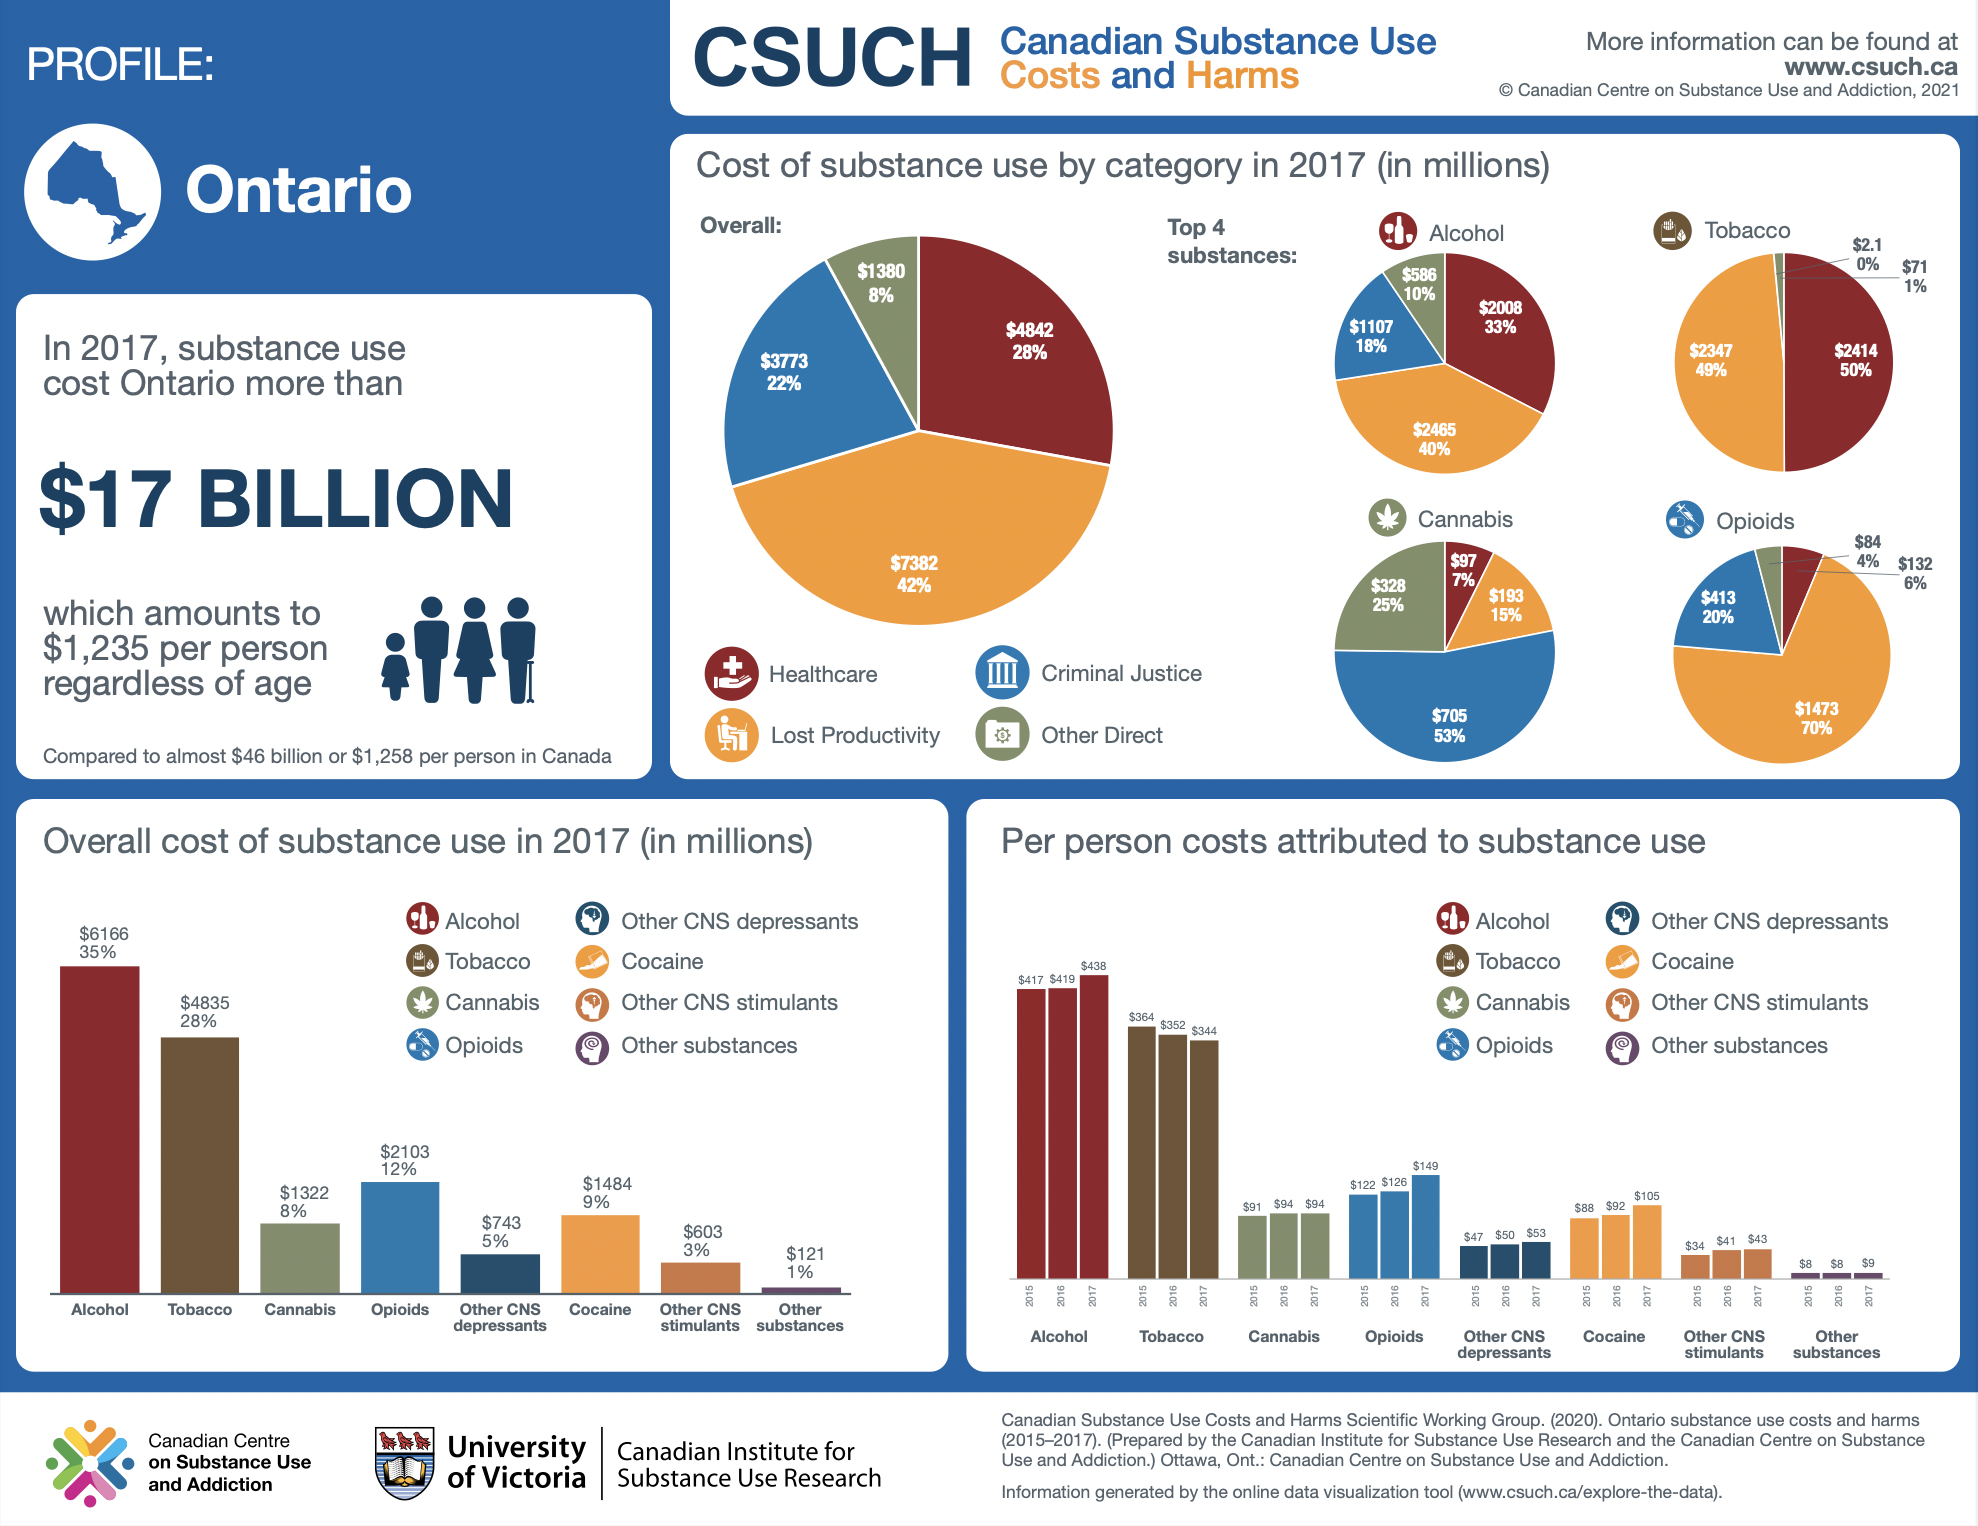 Canadian Substance Use Costs and Harms charts